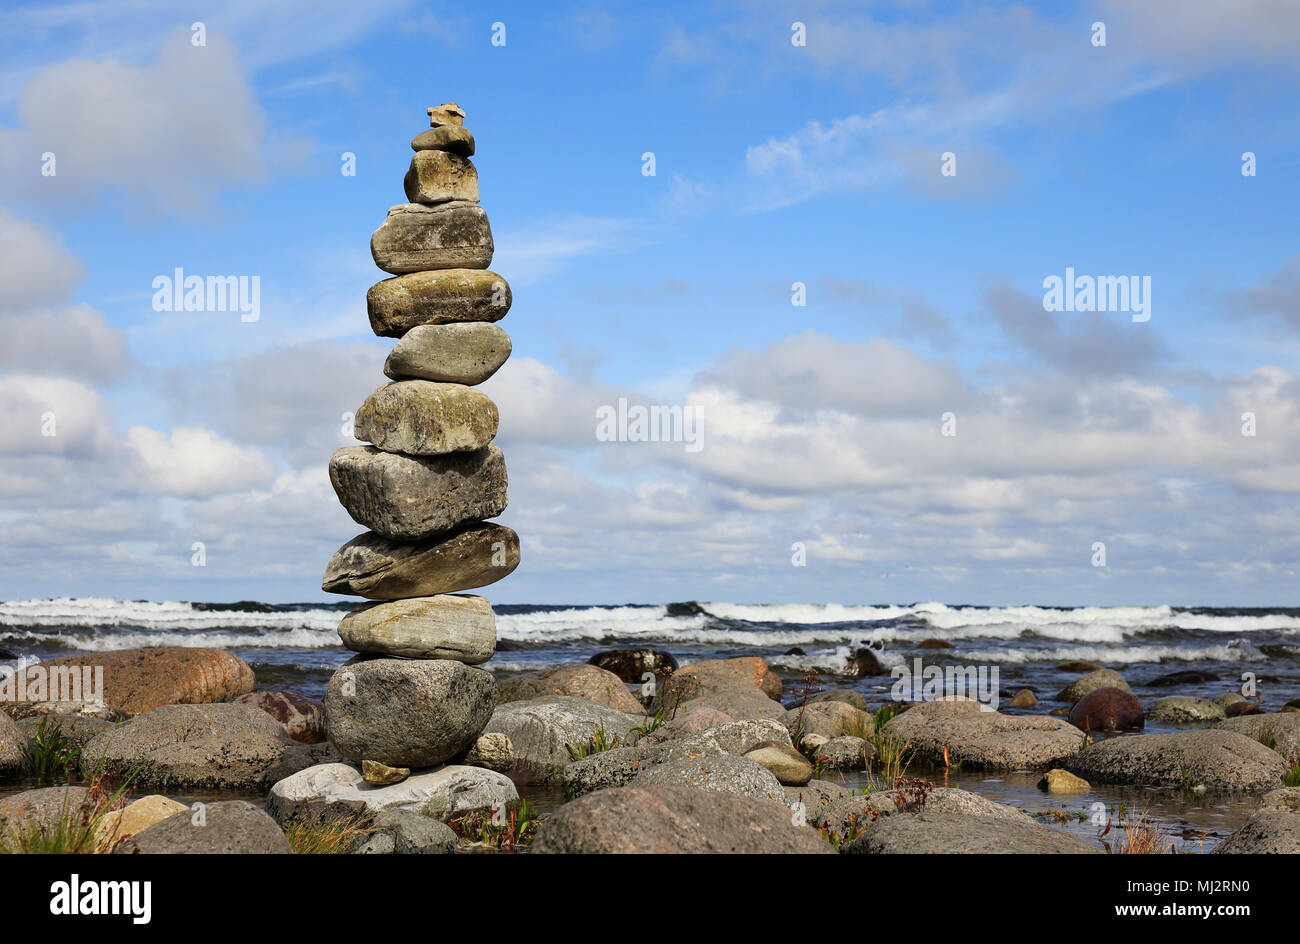 One stone tower at the shore. Stock Photo